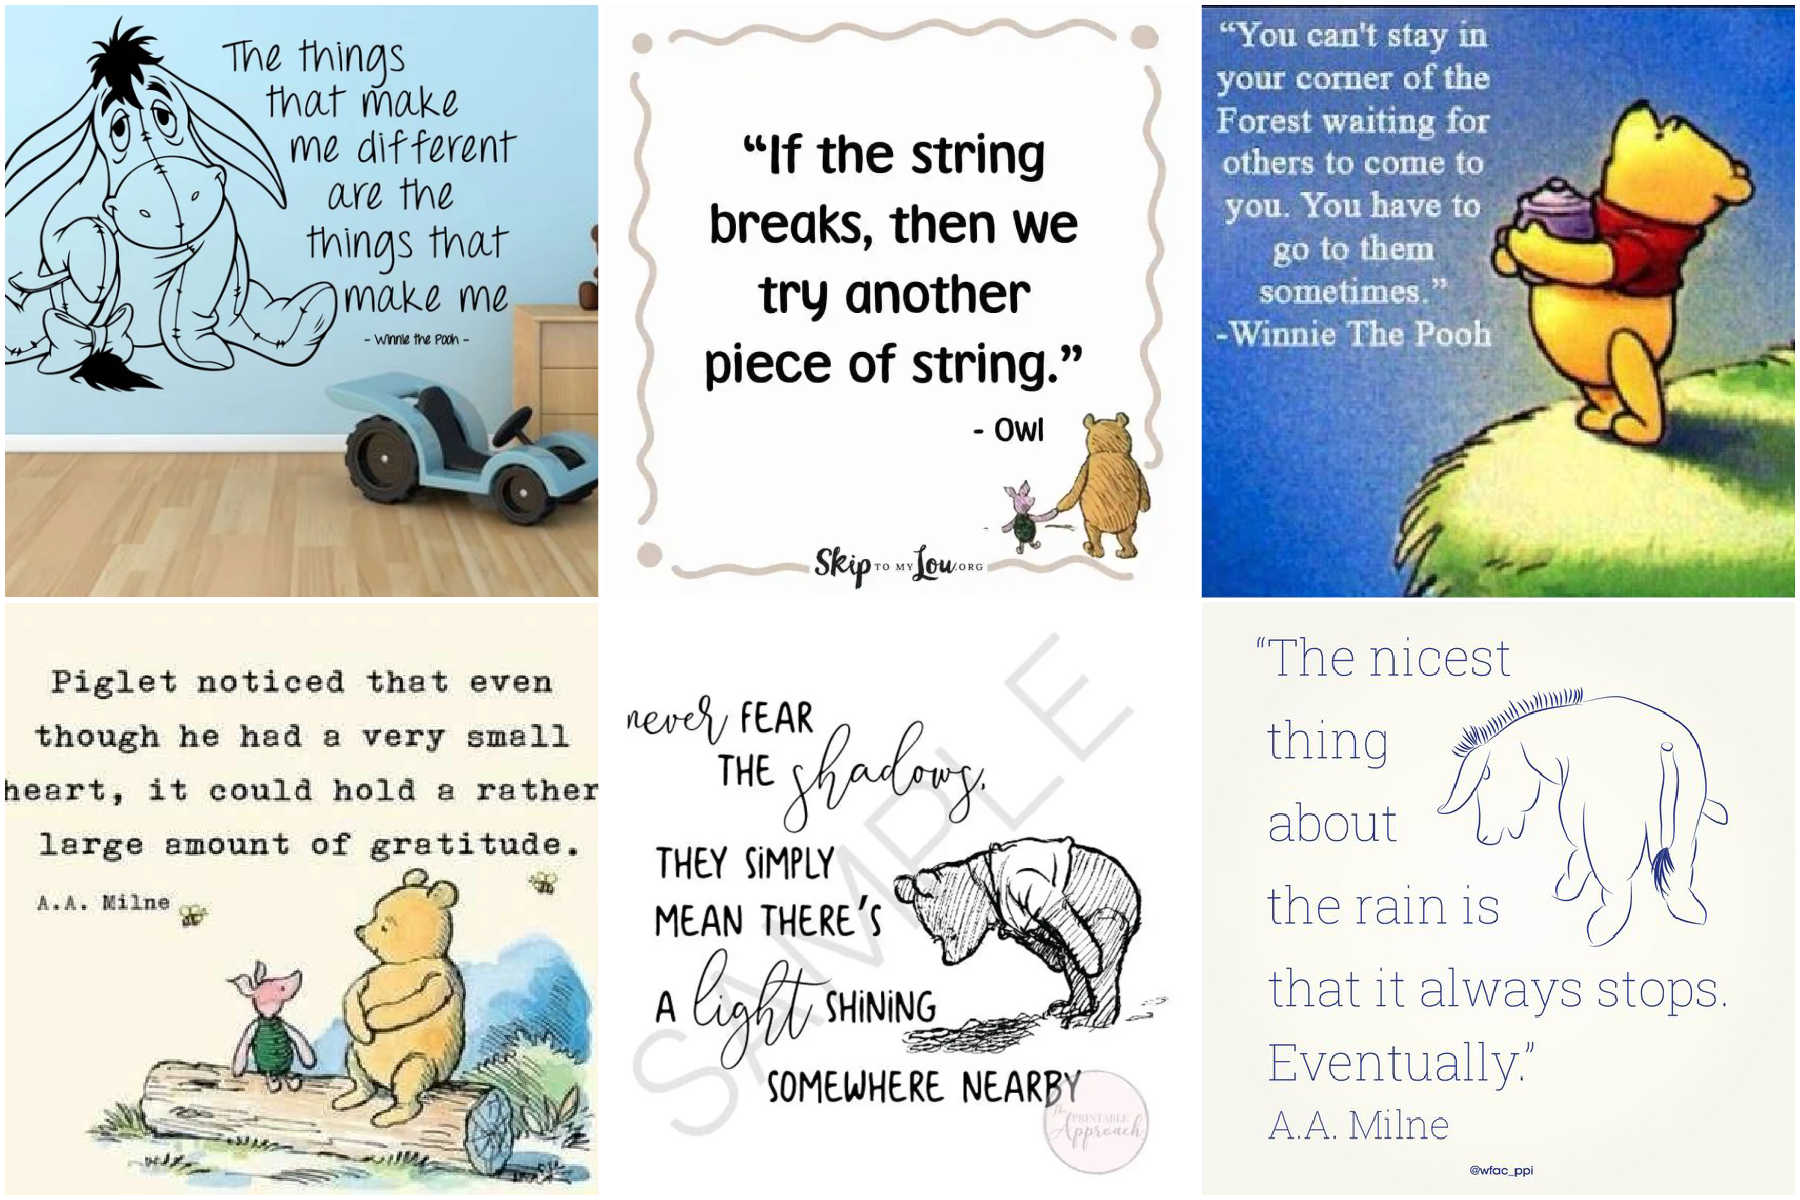 44 Winnie the Pooh Inspirational Quotes - Play Party Plan